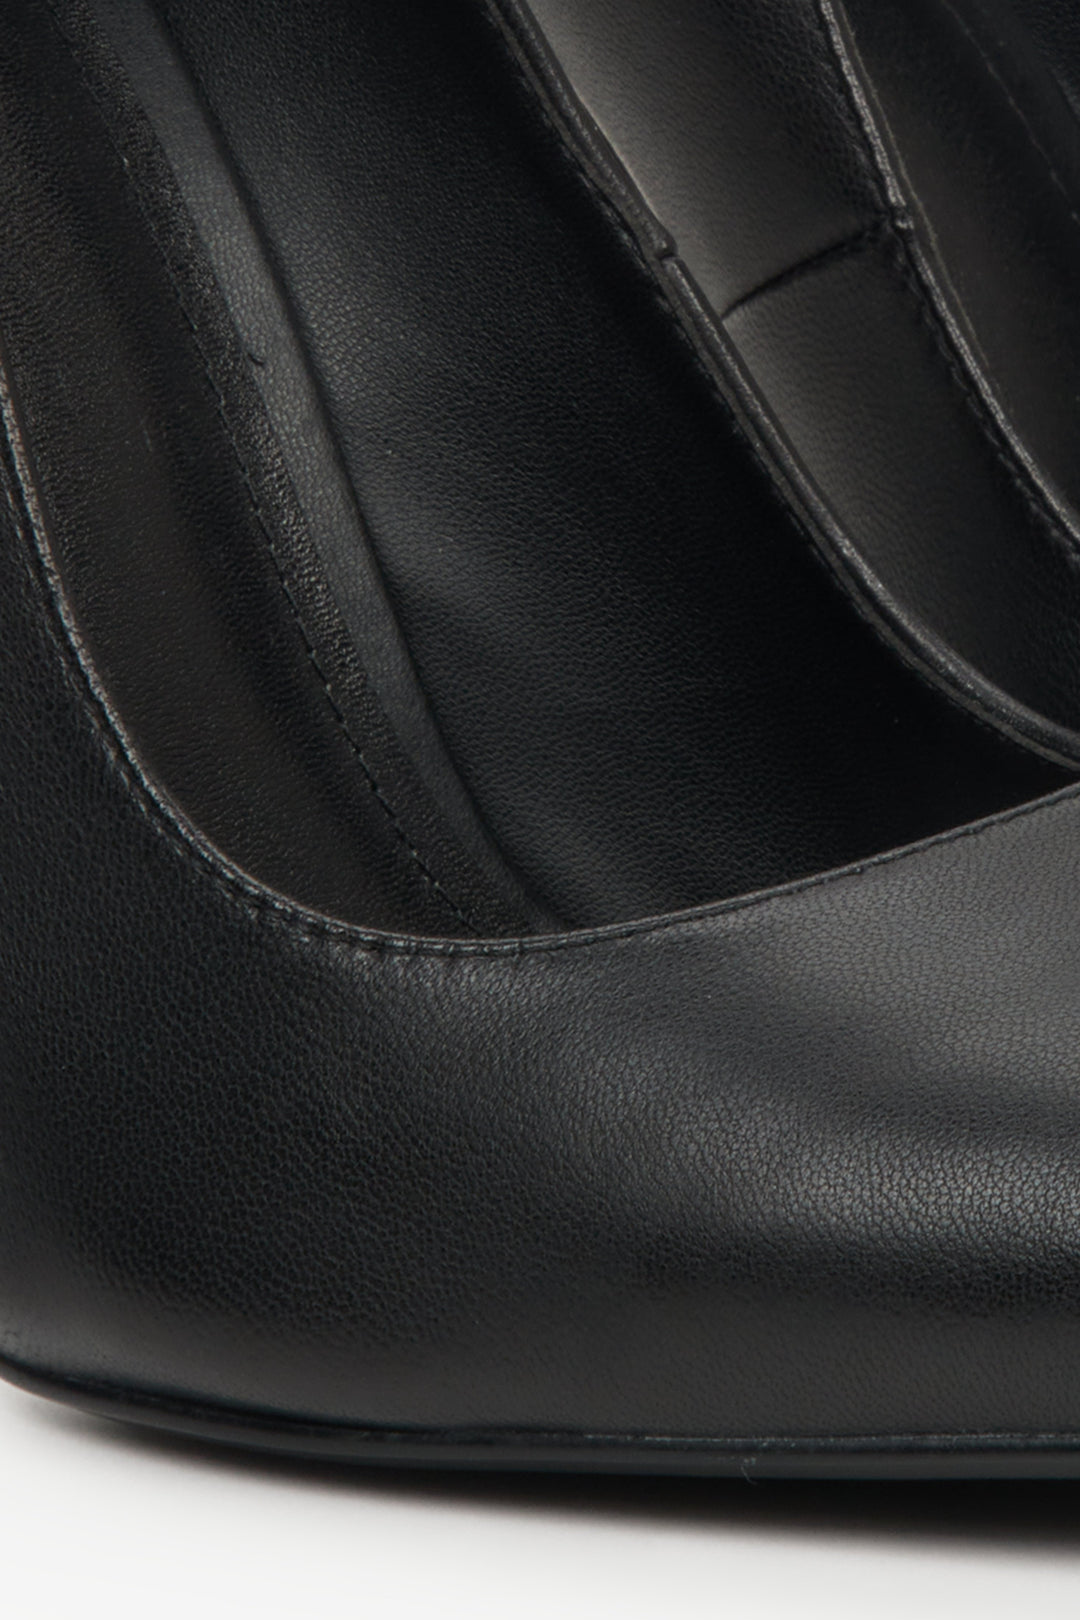 Women's black high heels by Estro - close-up on the details.